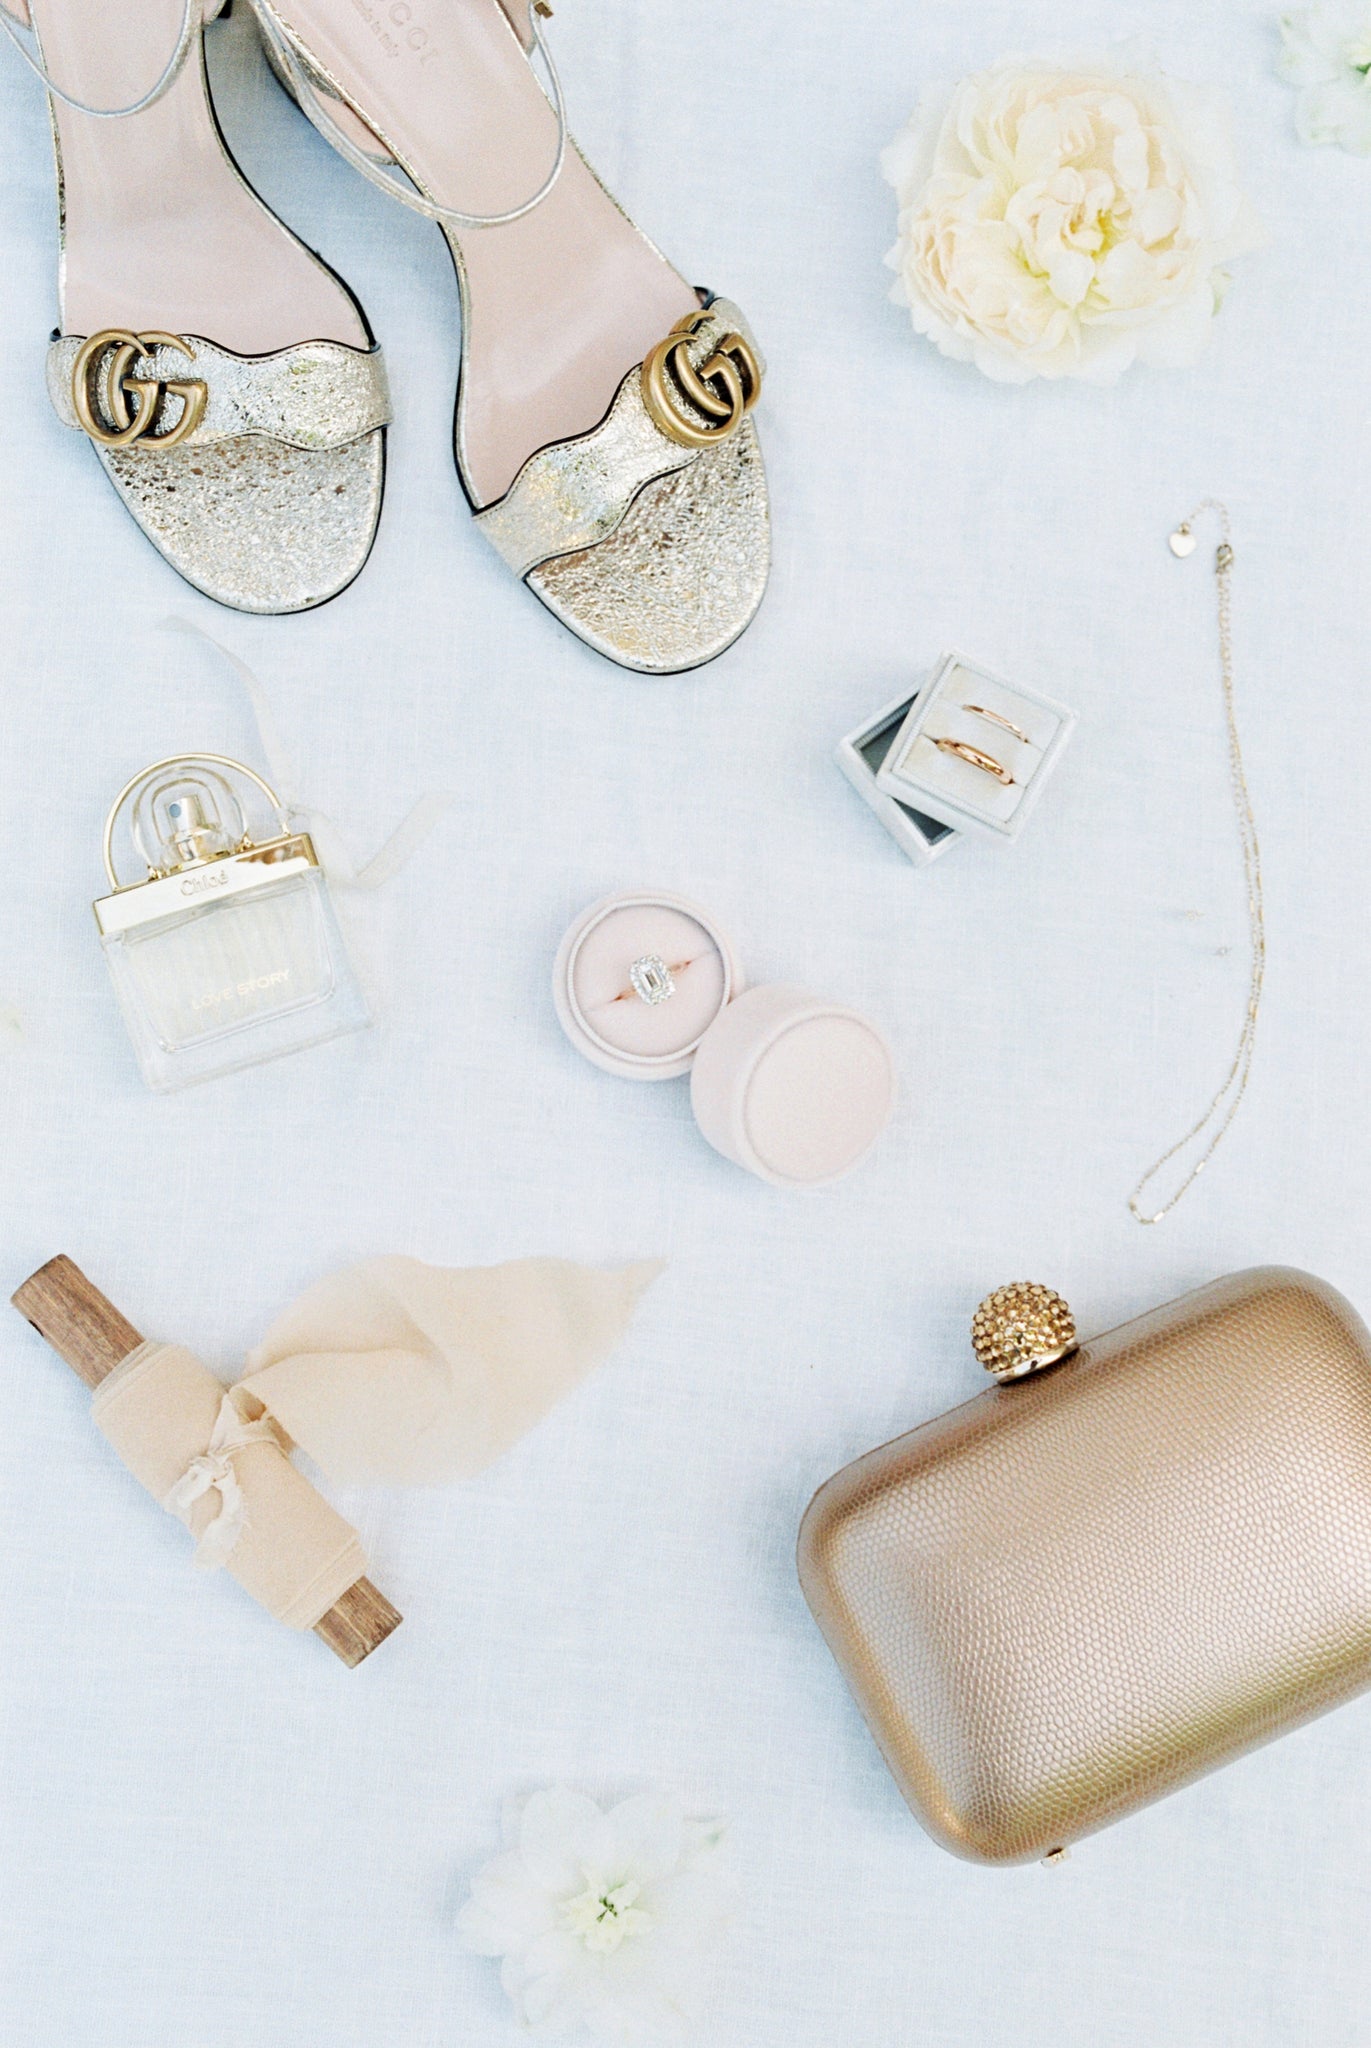 flatlay, bride shoes, jewelry, perfume, ring, purse, Katie Dean Jewelry, Provence, France Wedding, cathedral veil